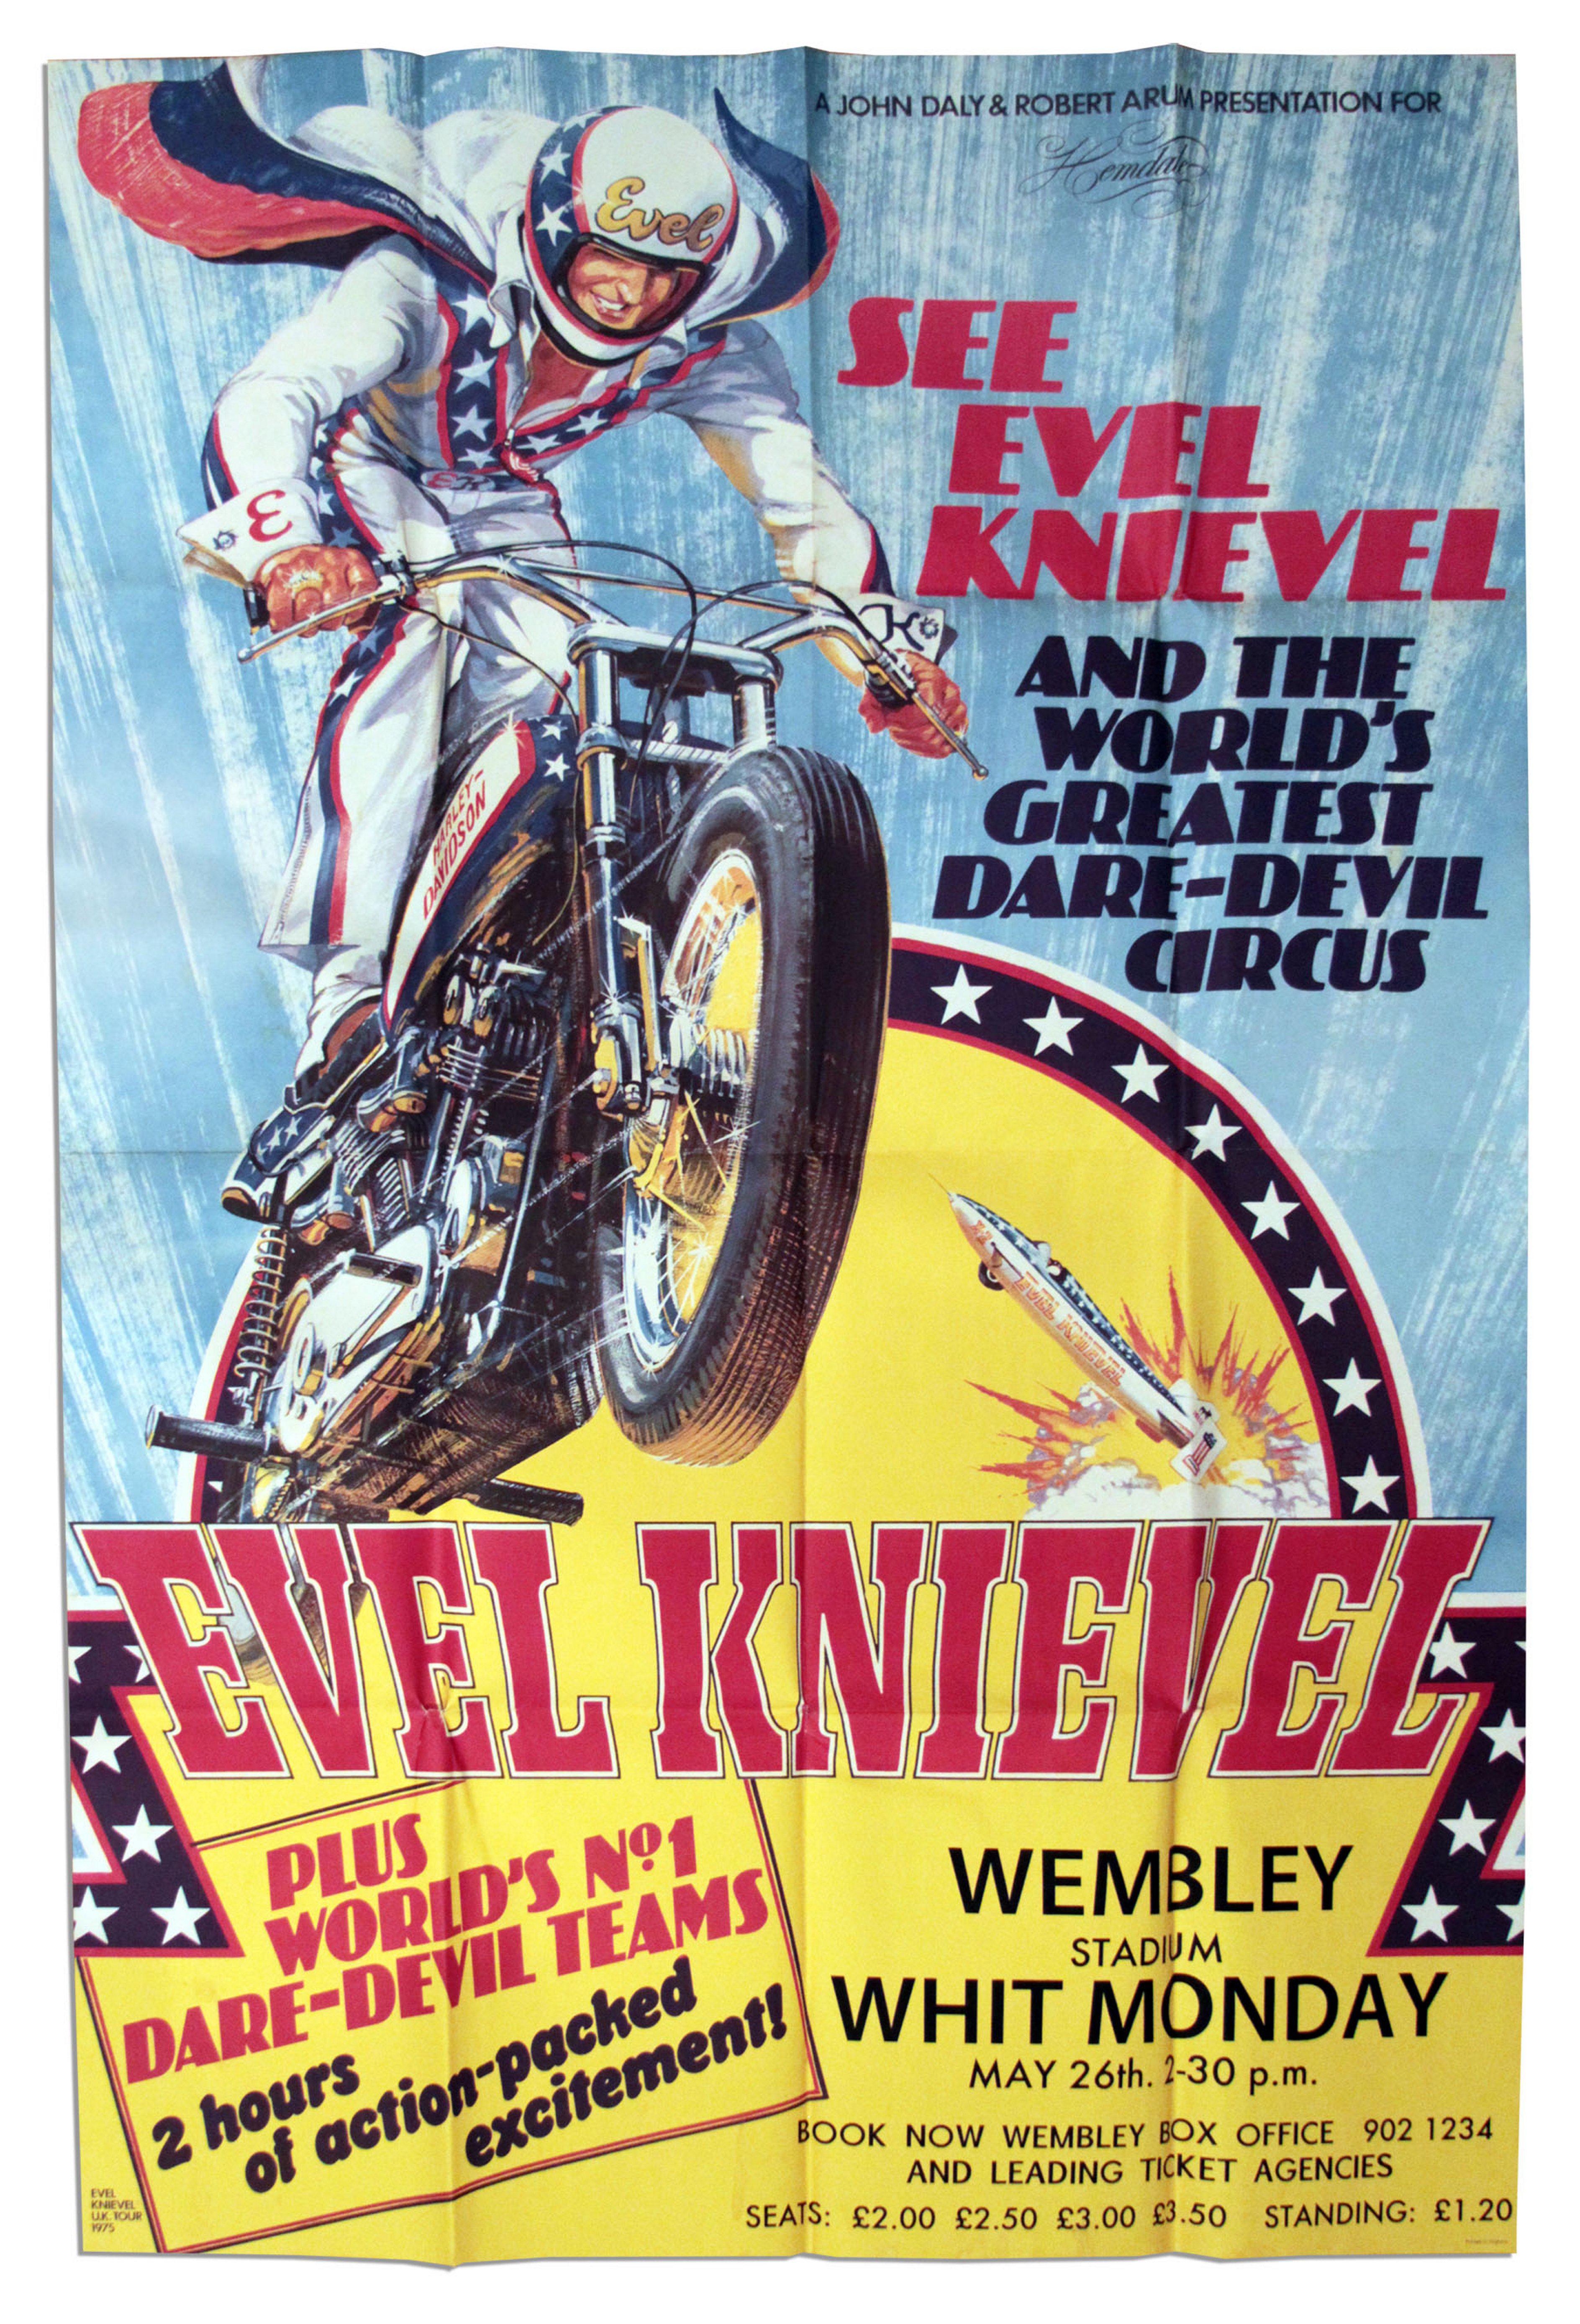 Evel Knievel a 1971 daredevil motion picture